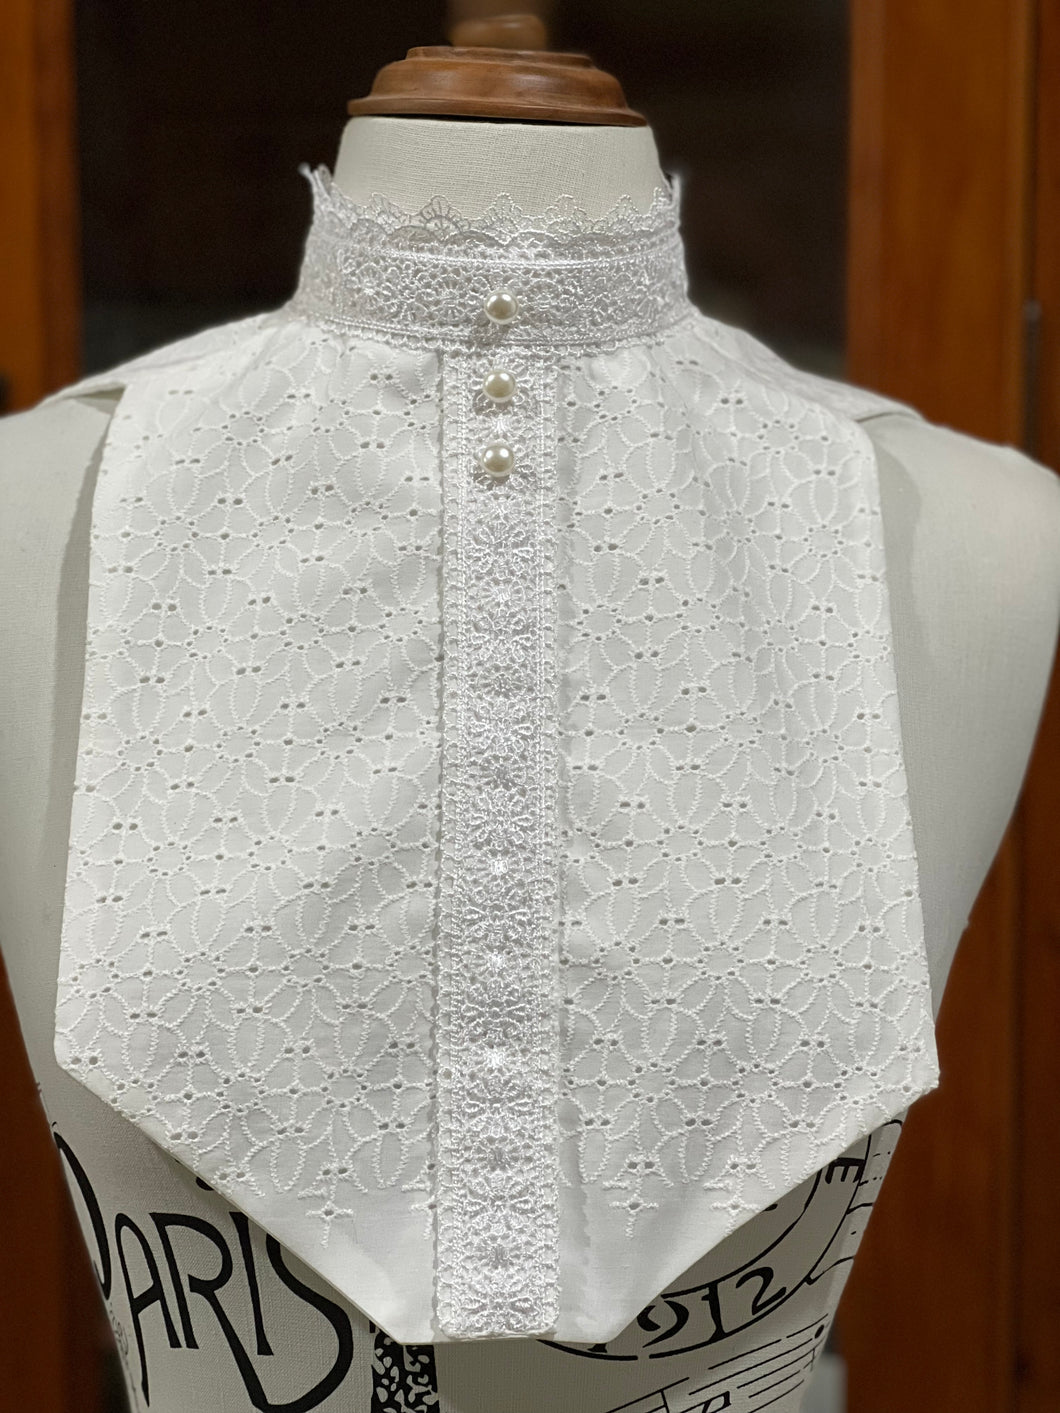 Embroidered daisy bib with lace and pearls